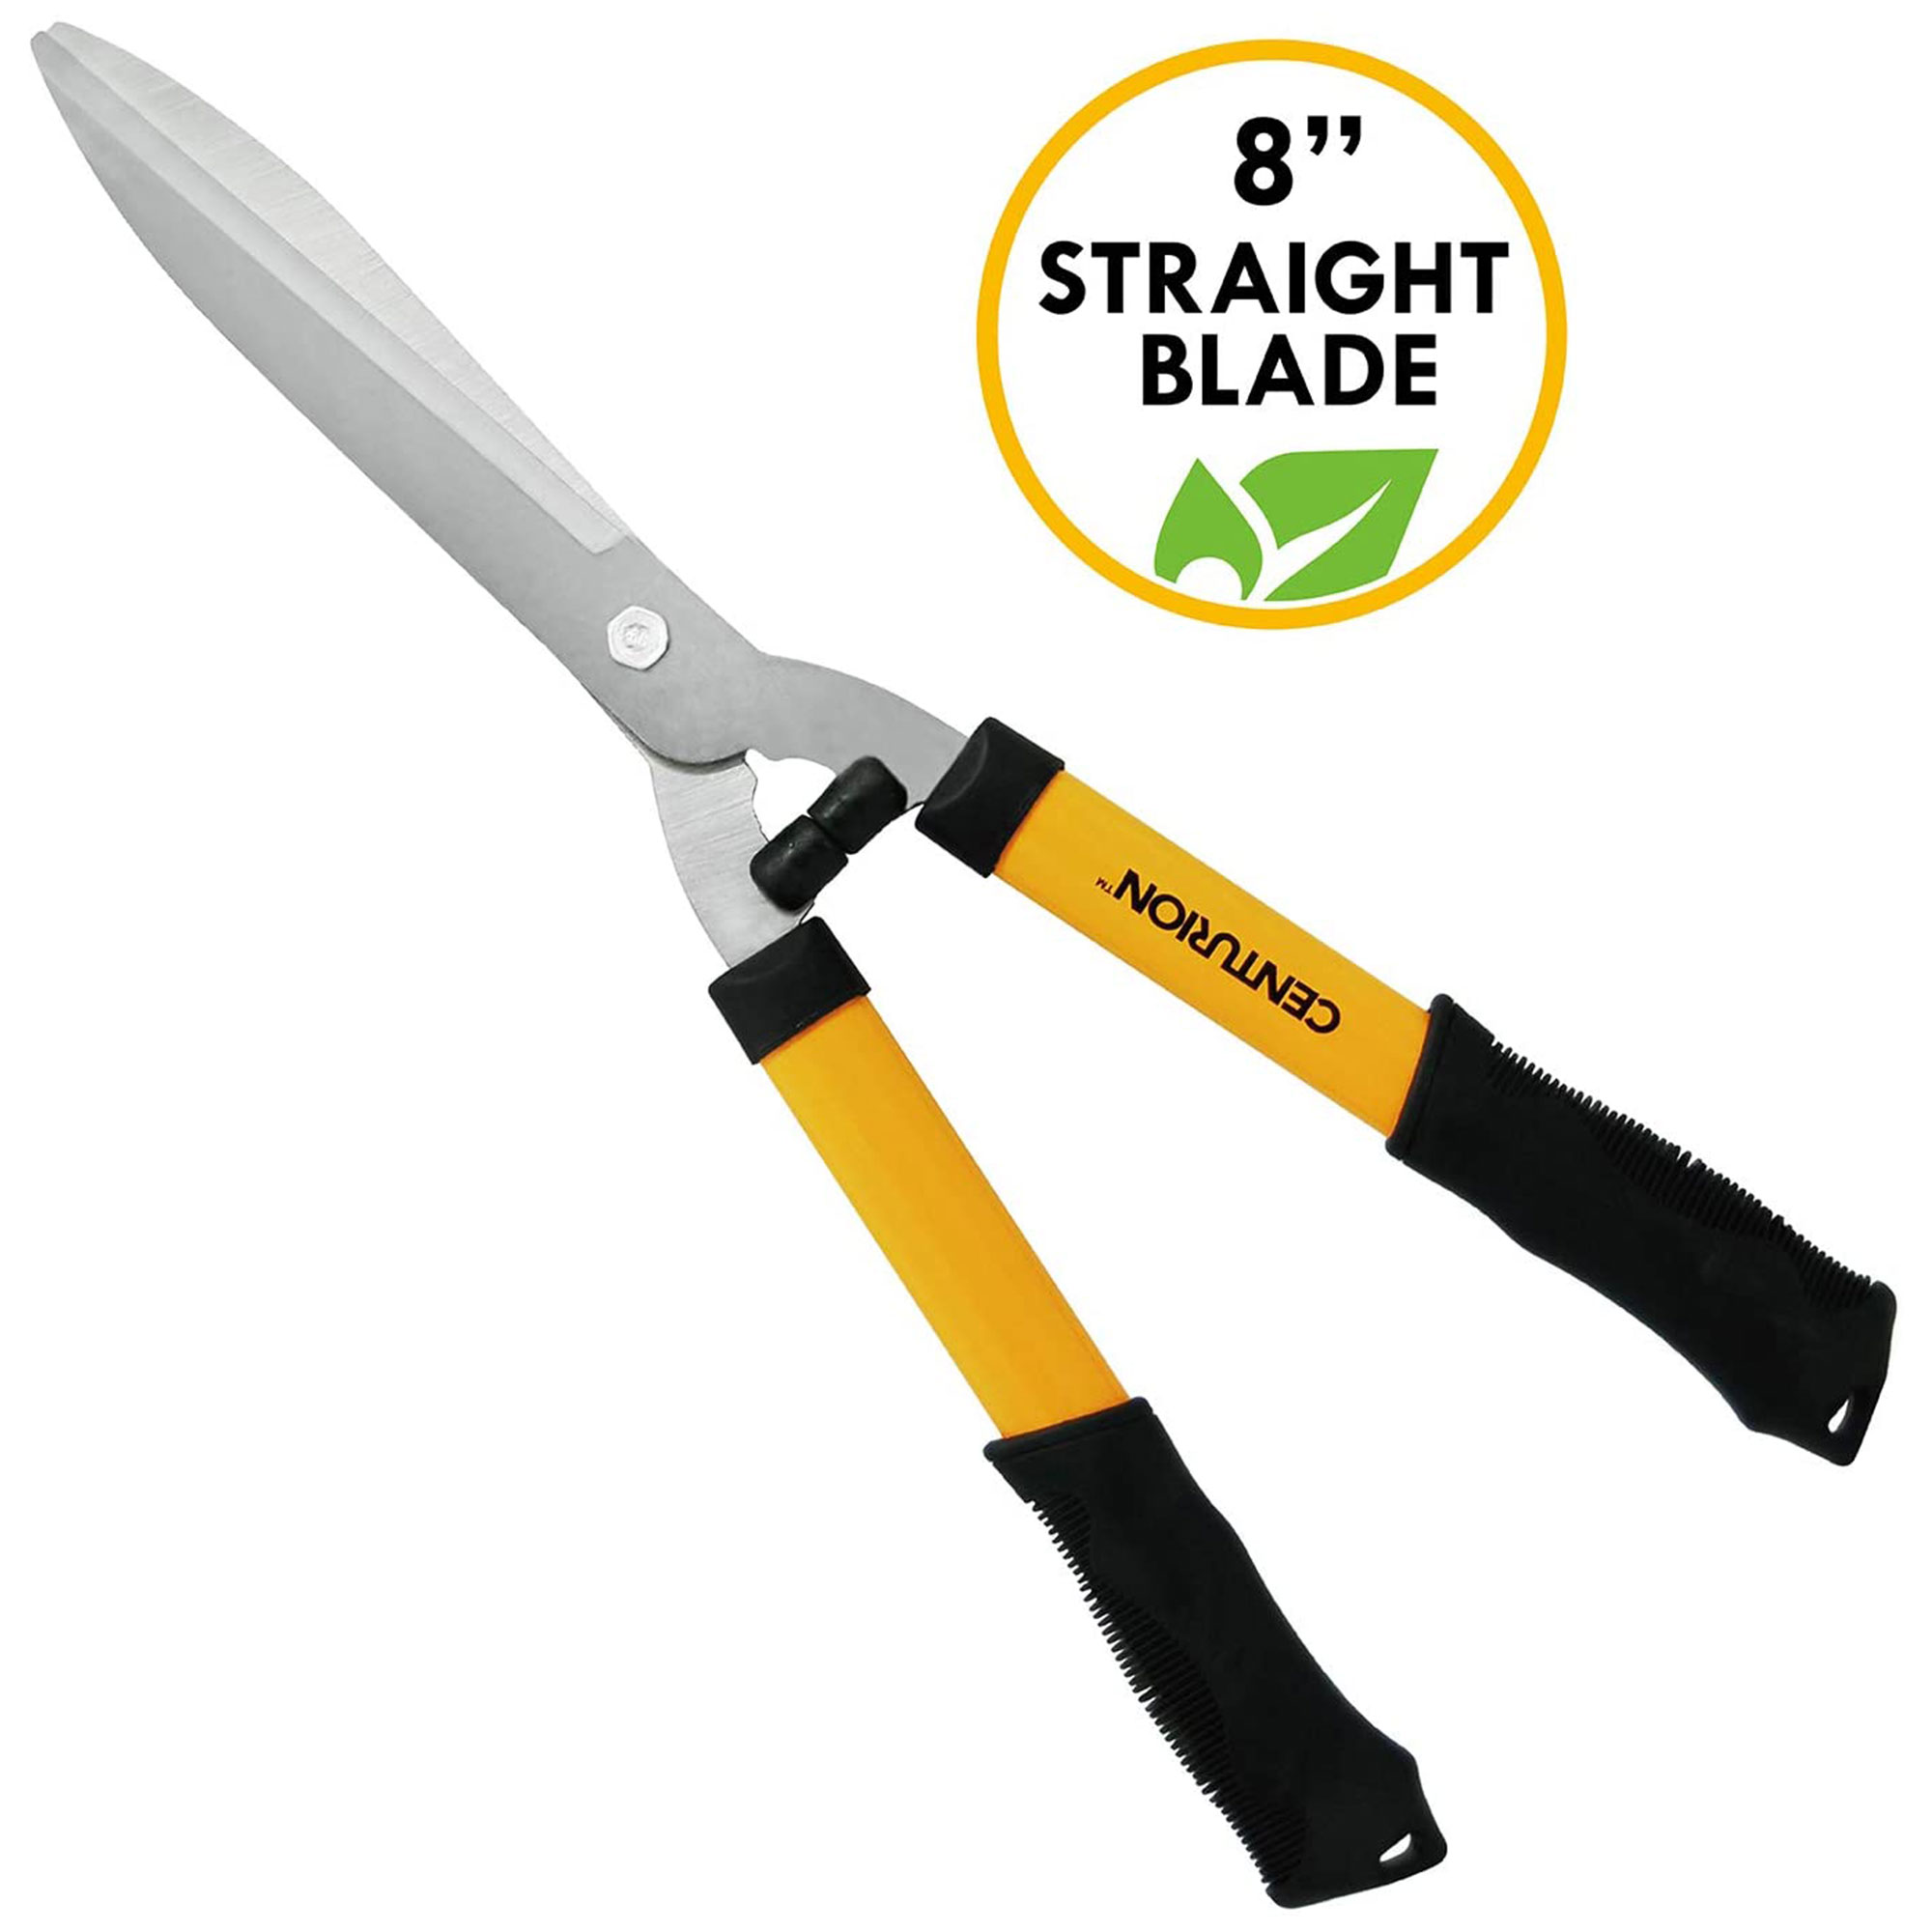 CENTURION 511 8 Inch Precision Steel Blades Hedge Shears w/ Non-Slip Grips - image 2 of 8